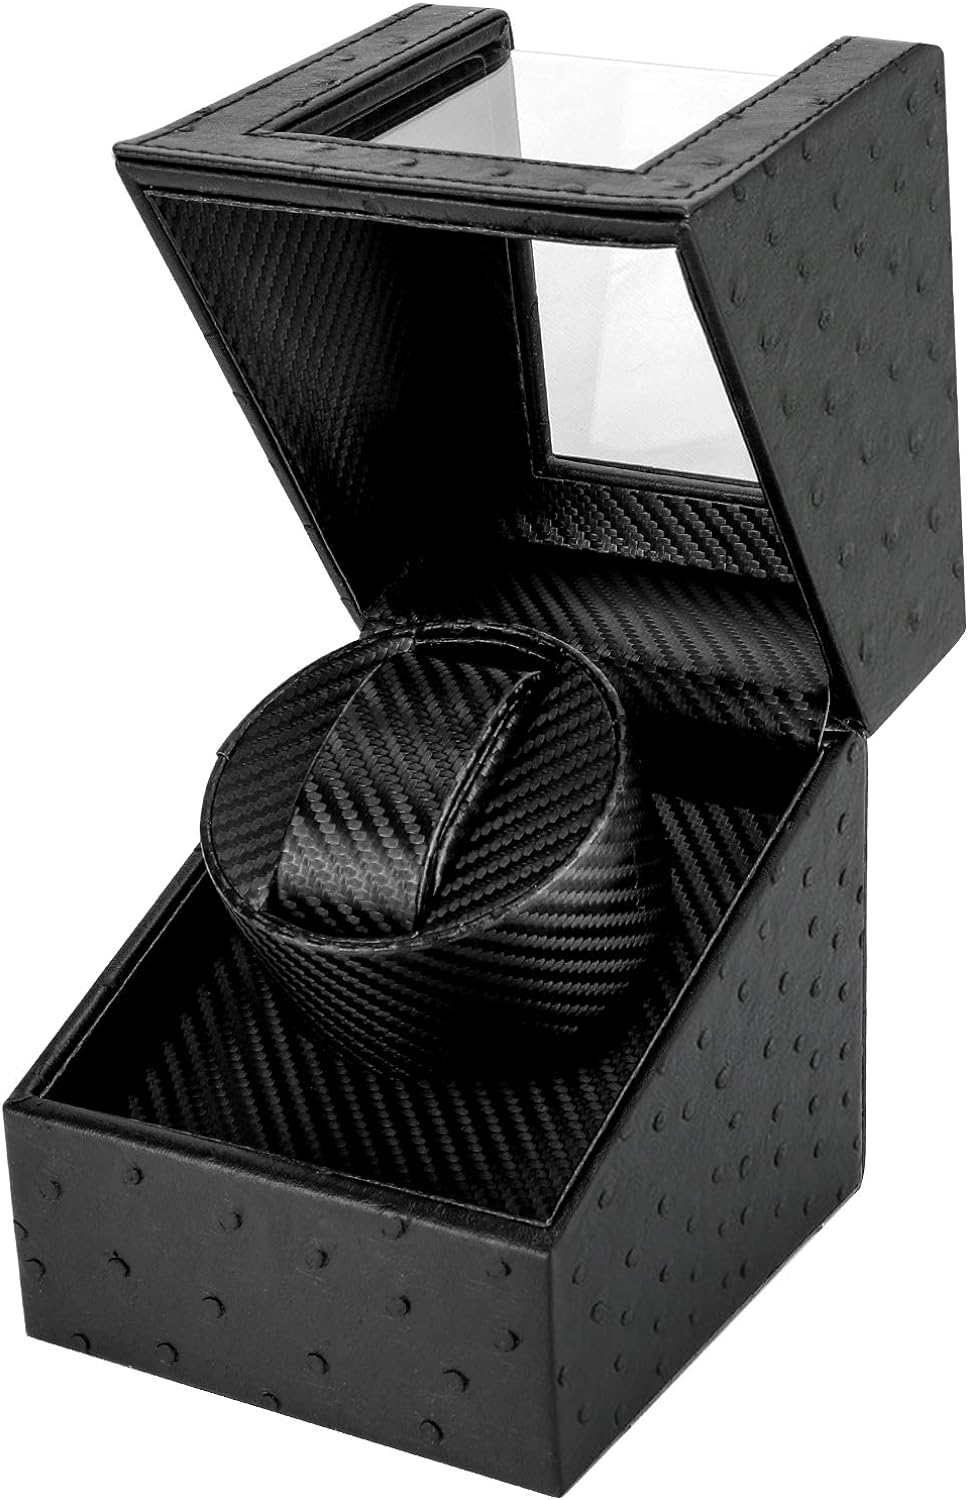 Automatic Watch Winder Box, Gifort Single Watch Winder Carbon Fibre Leather Watch Case with Quiet Motor, Battery Powered or AC Adapter - Ostrich Grain, Black(UK Plug)